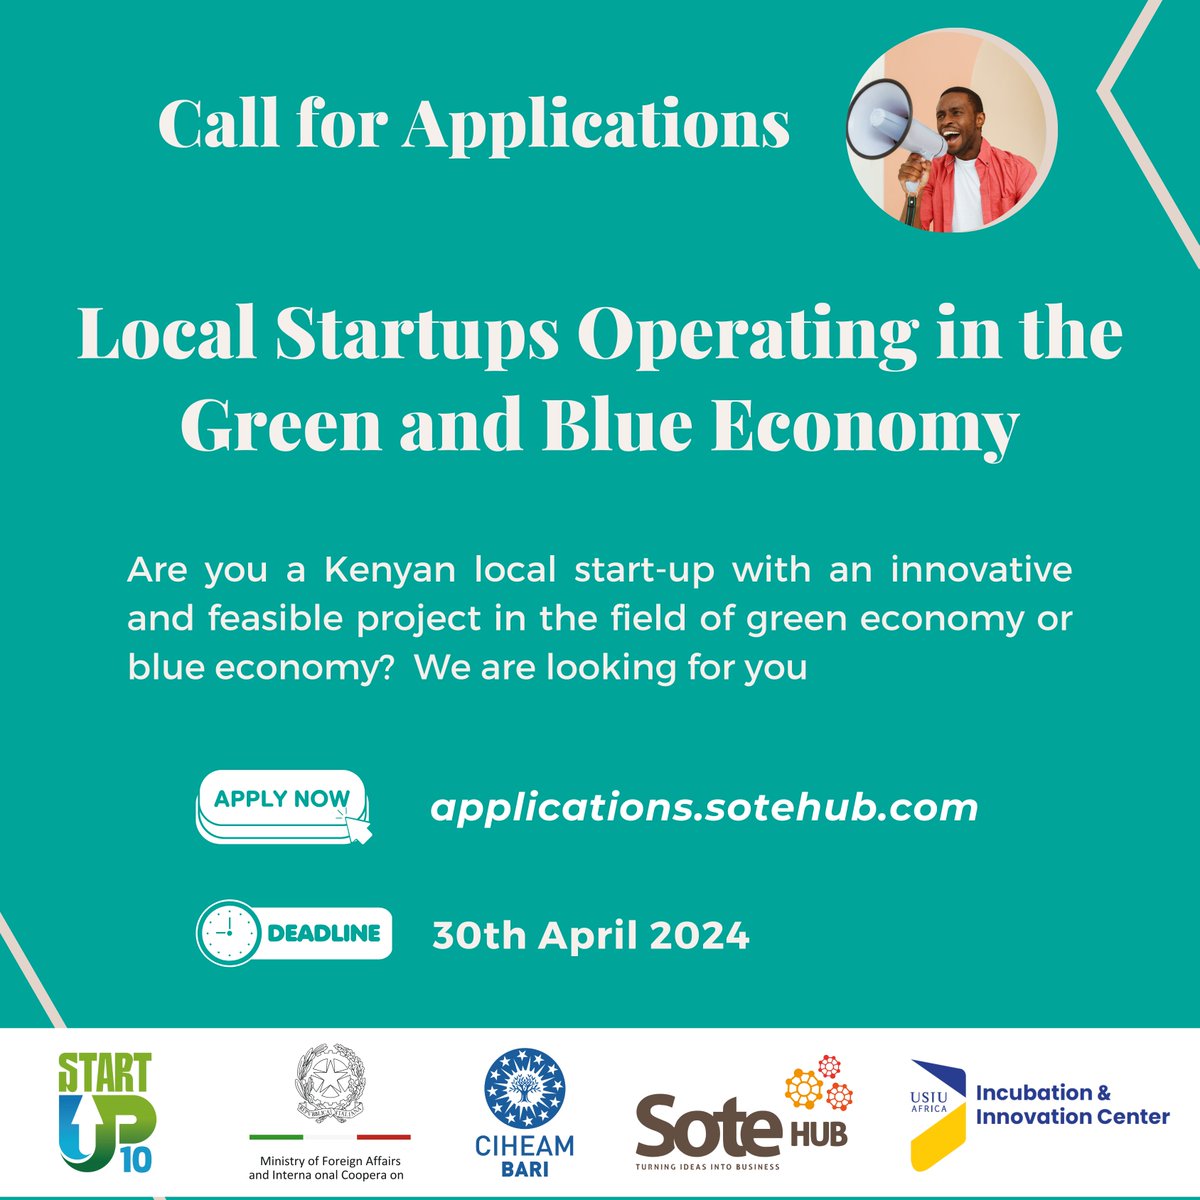 Are you a startup in the Green and Blue Economy? This is your chance to accelerate your growth. Participate in the Startup10 Project! The project provides a six-month coaching program and a chance to win a prize of € 5,000.00 to be used in form of support tools, training,